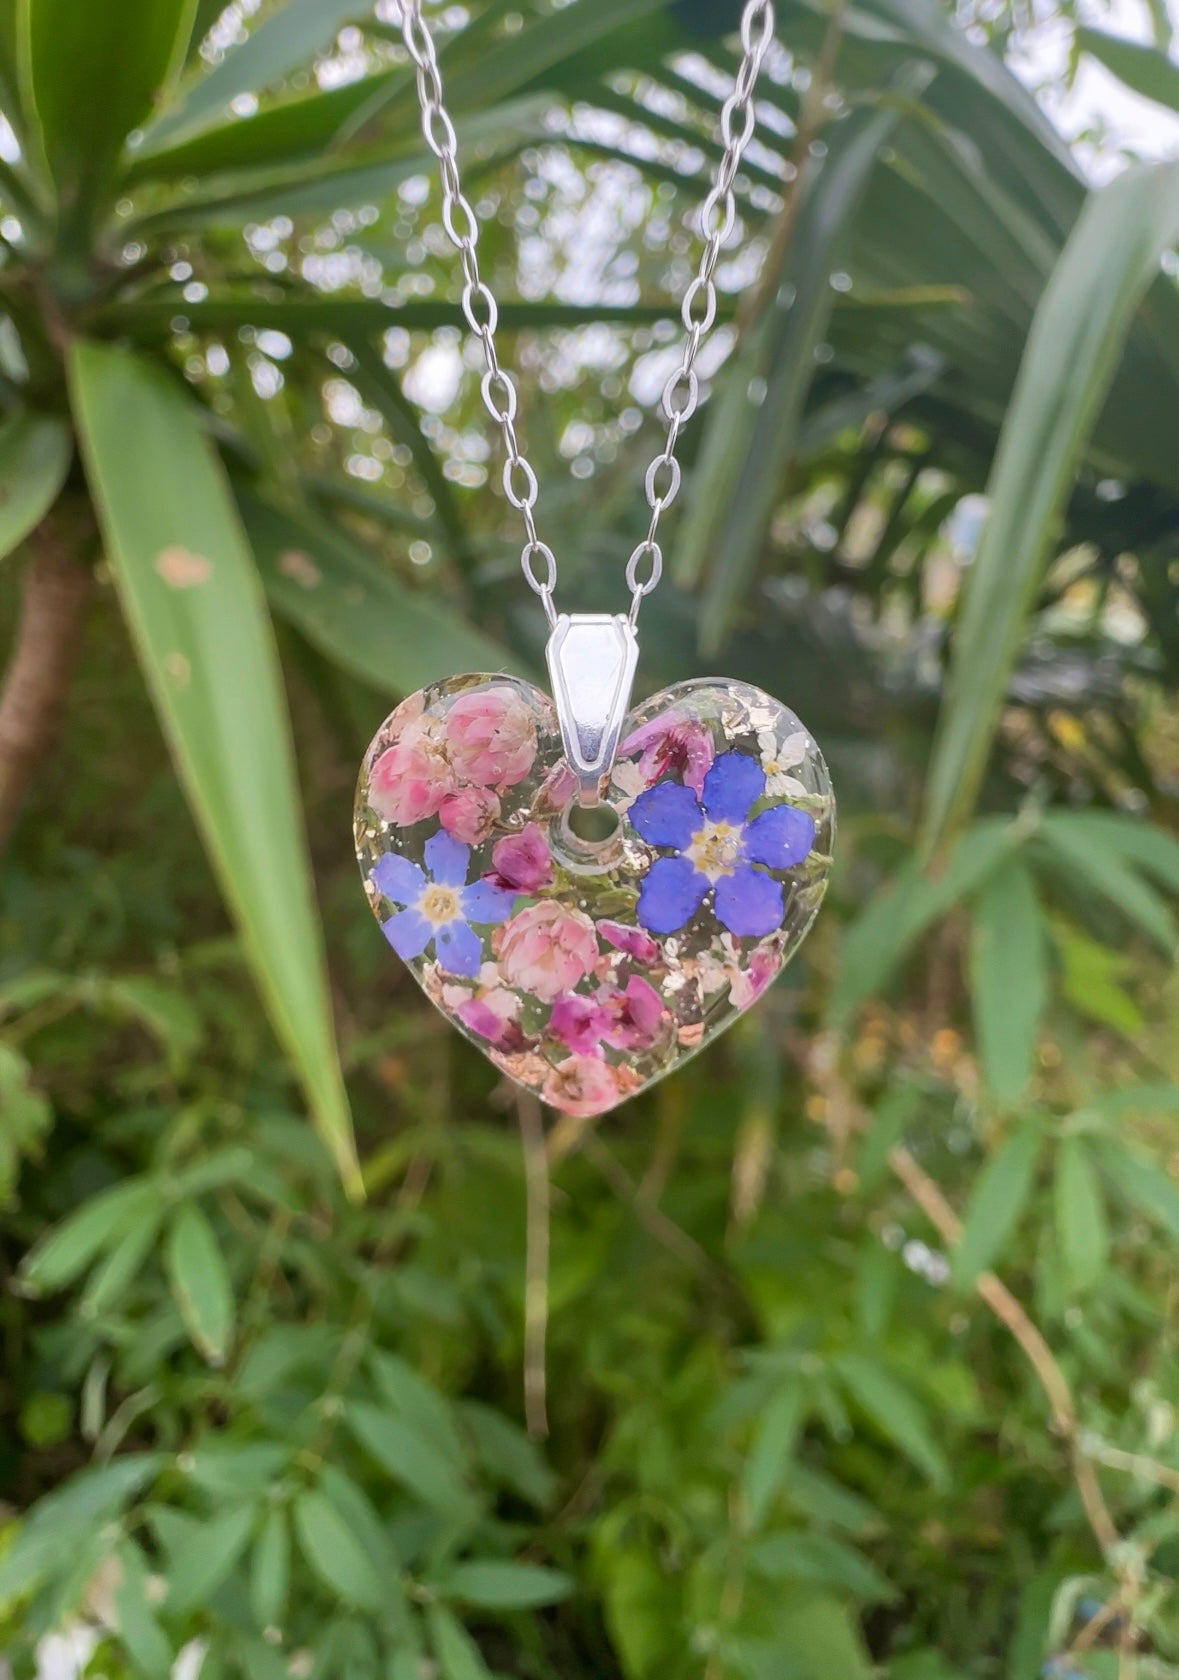 Forget me not Garden Heart Silver necklace.